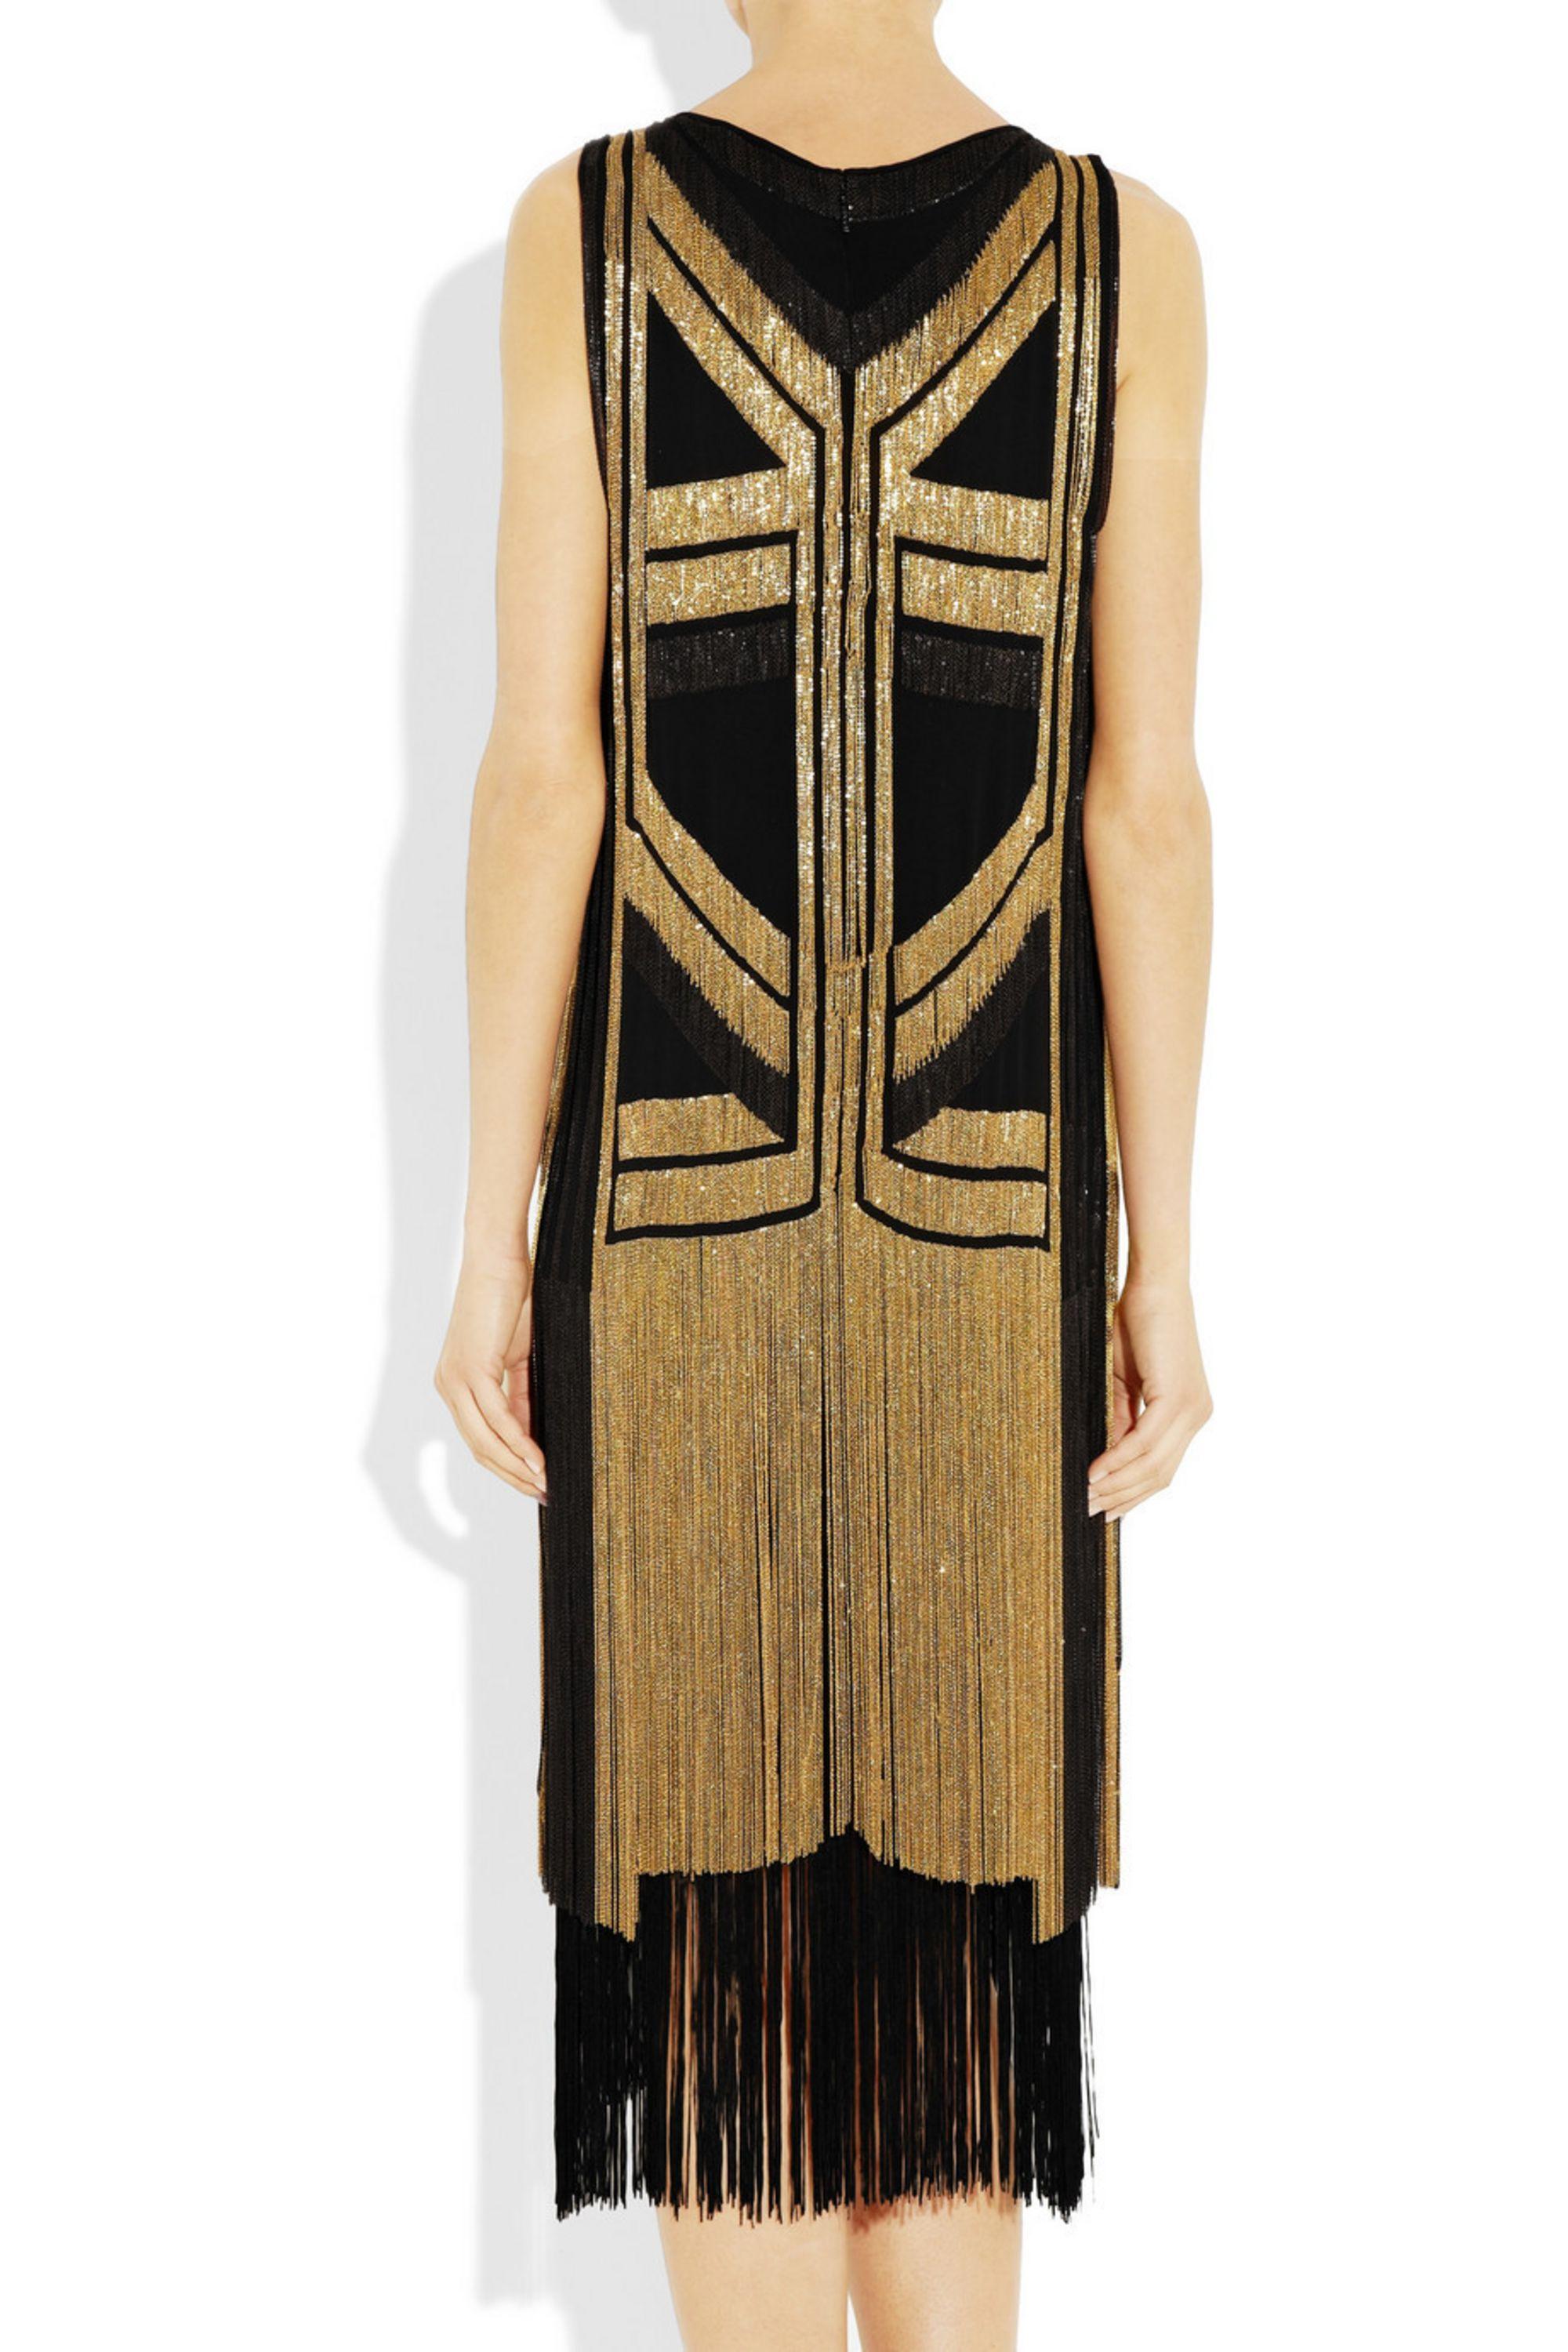 Rare Gucci Fringed chain-embellished silk dress as seen on Taylor Swift 2